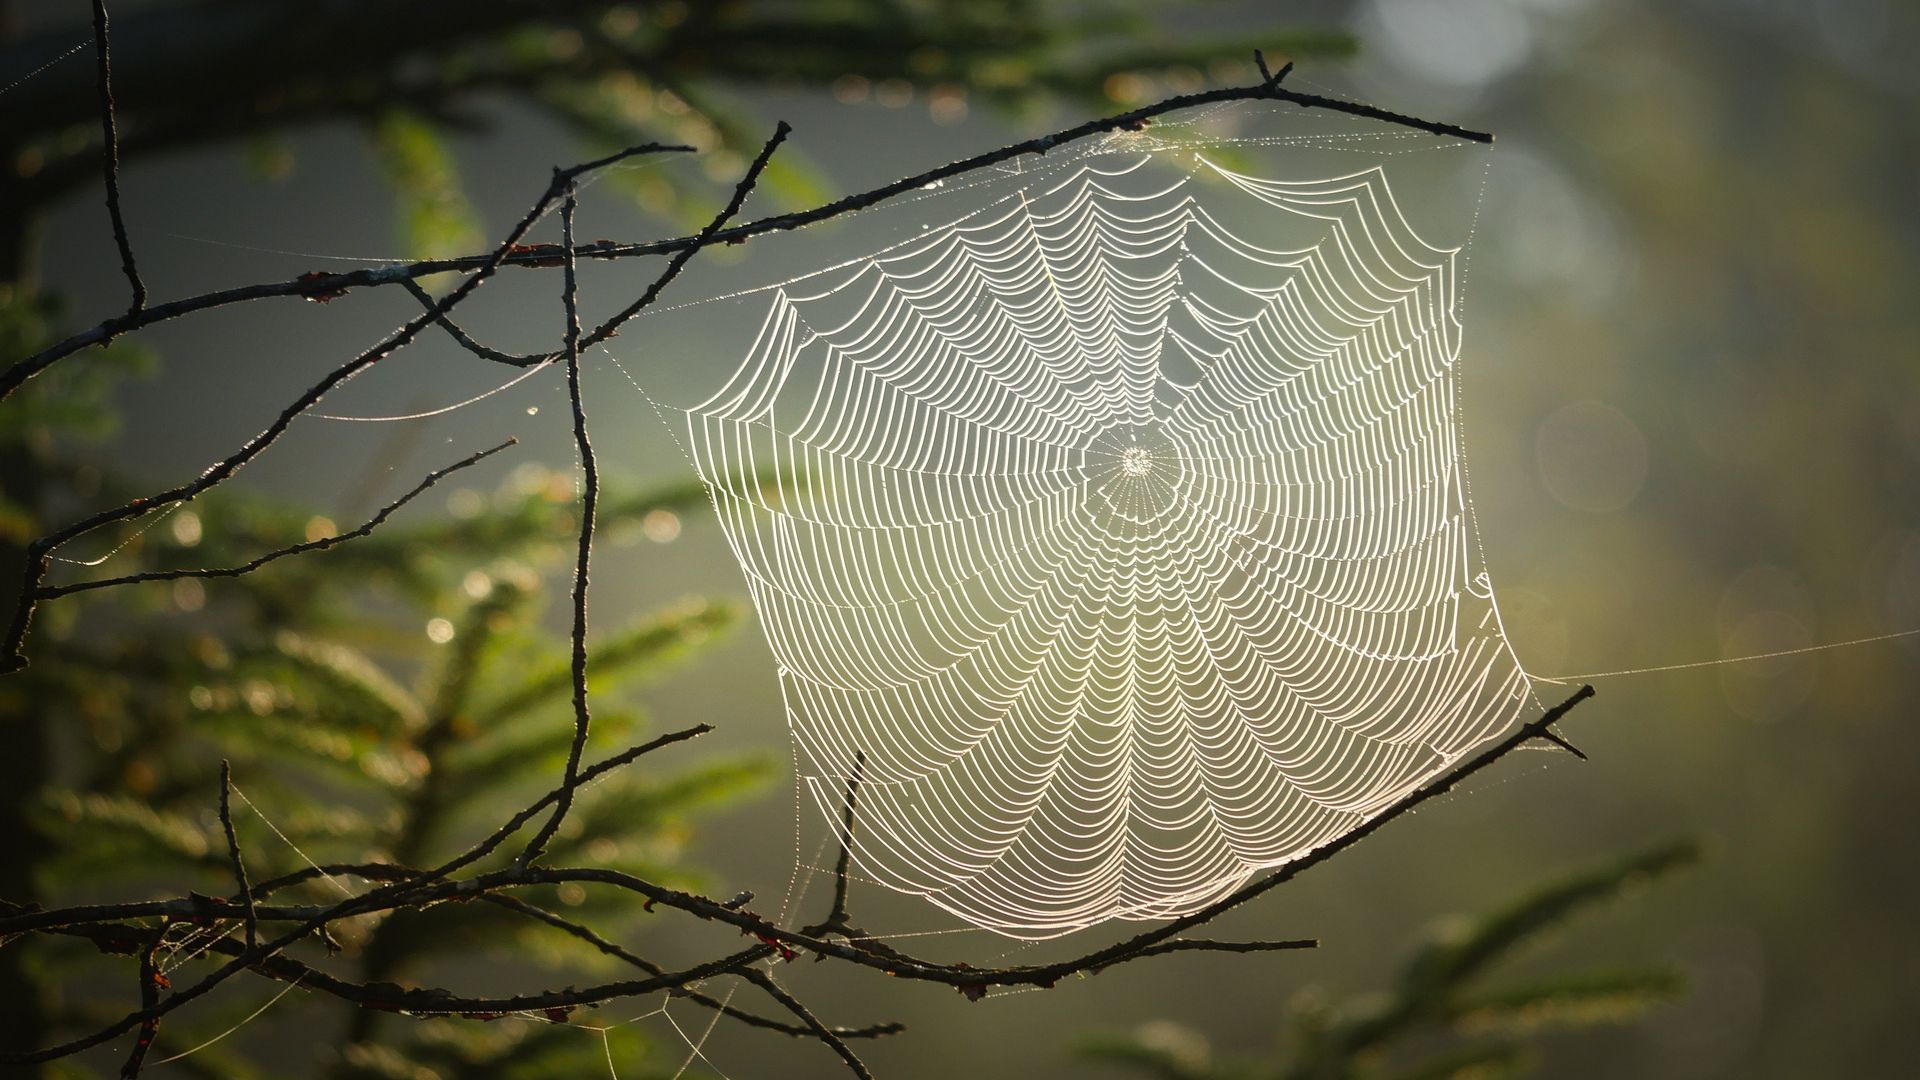 Spiders weave a web of memories